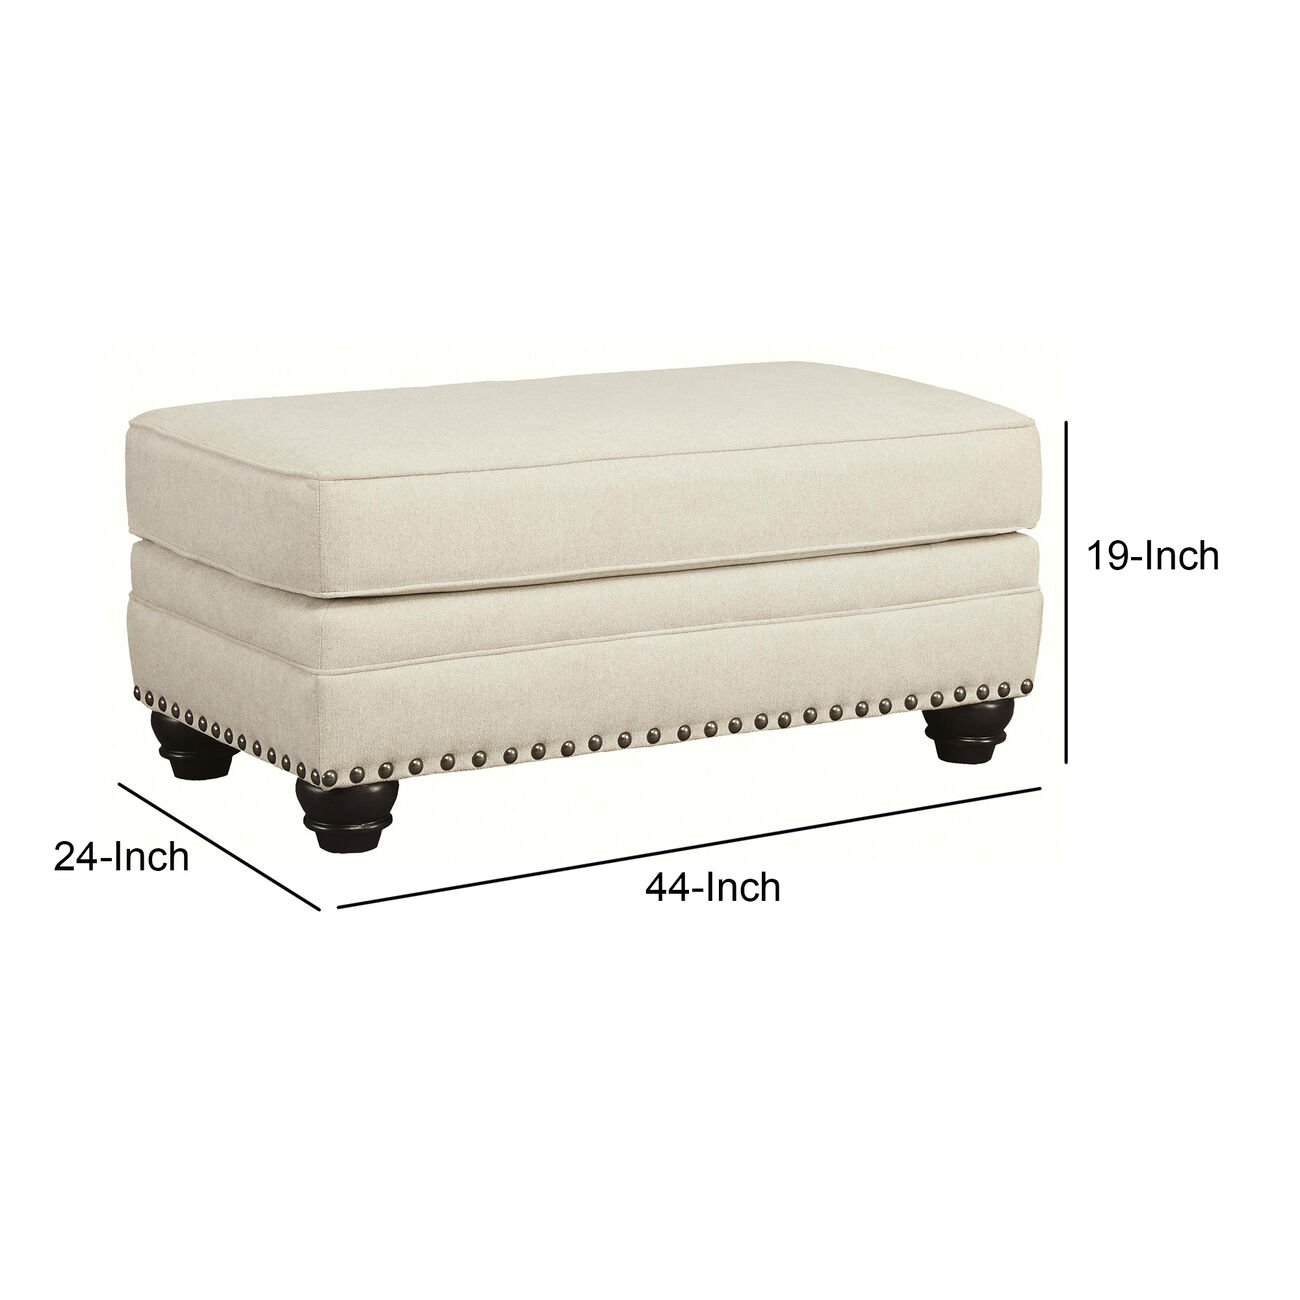 Wooden Ottoman with Nailhead Trims and Bun Feet, White and Black